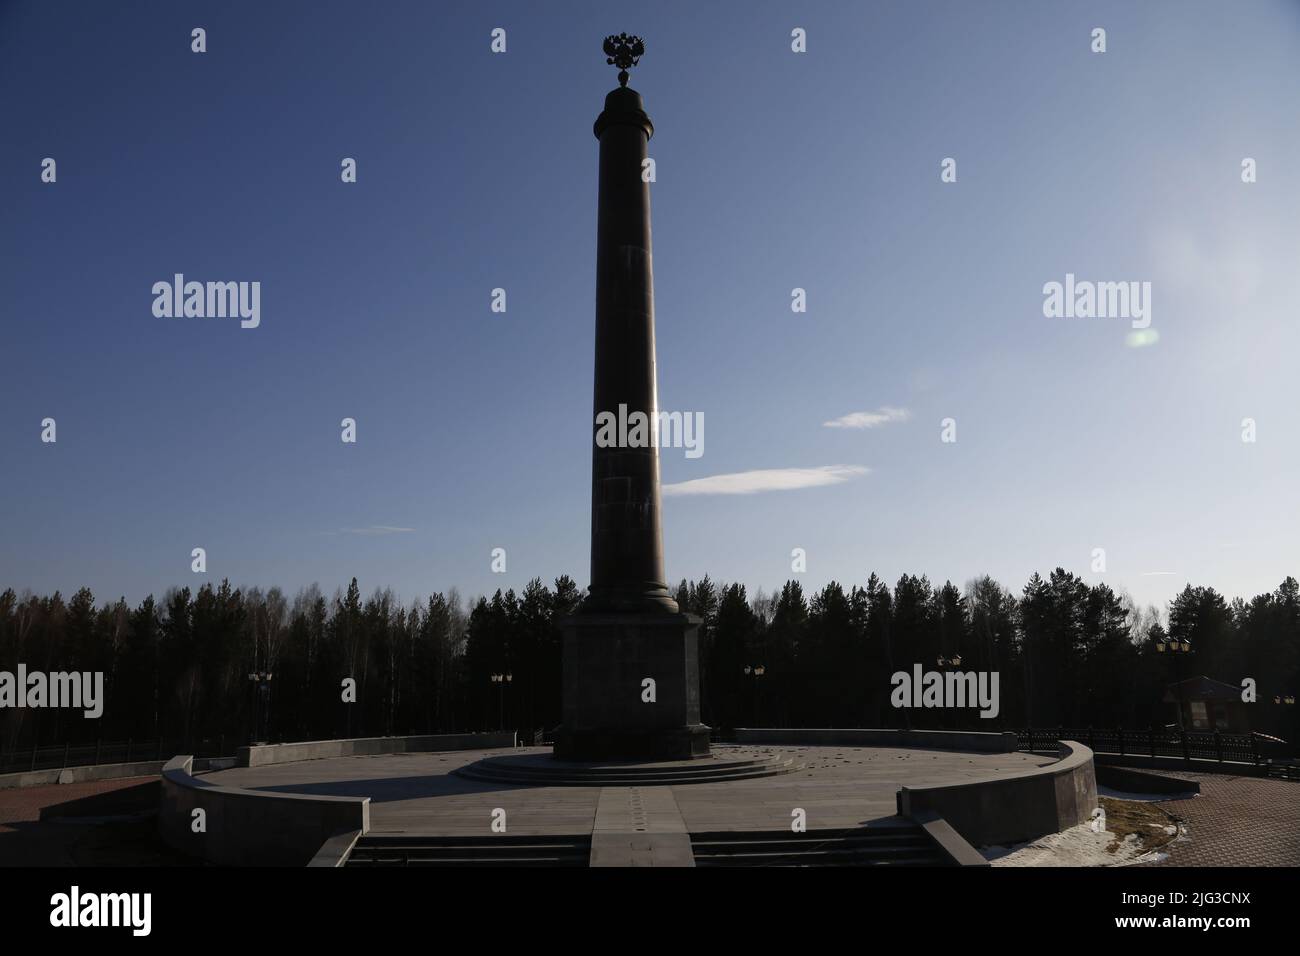 Monumental obelisk indicating the border between Europe and Asia in a forest near Ekaterinburg, Russia Stock Photo